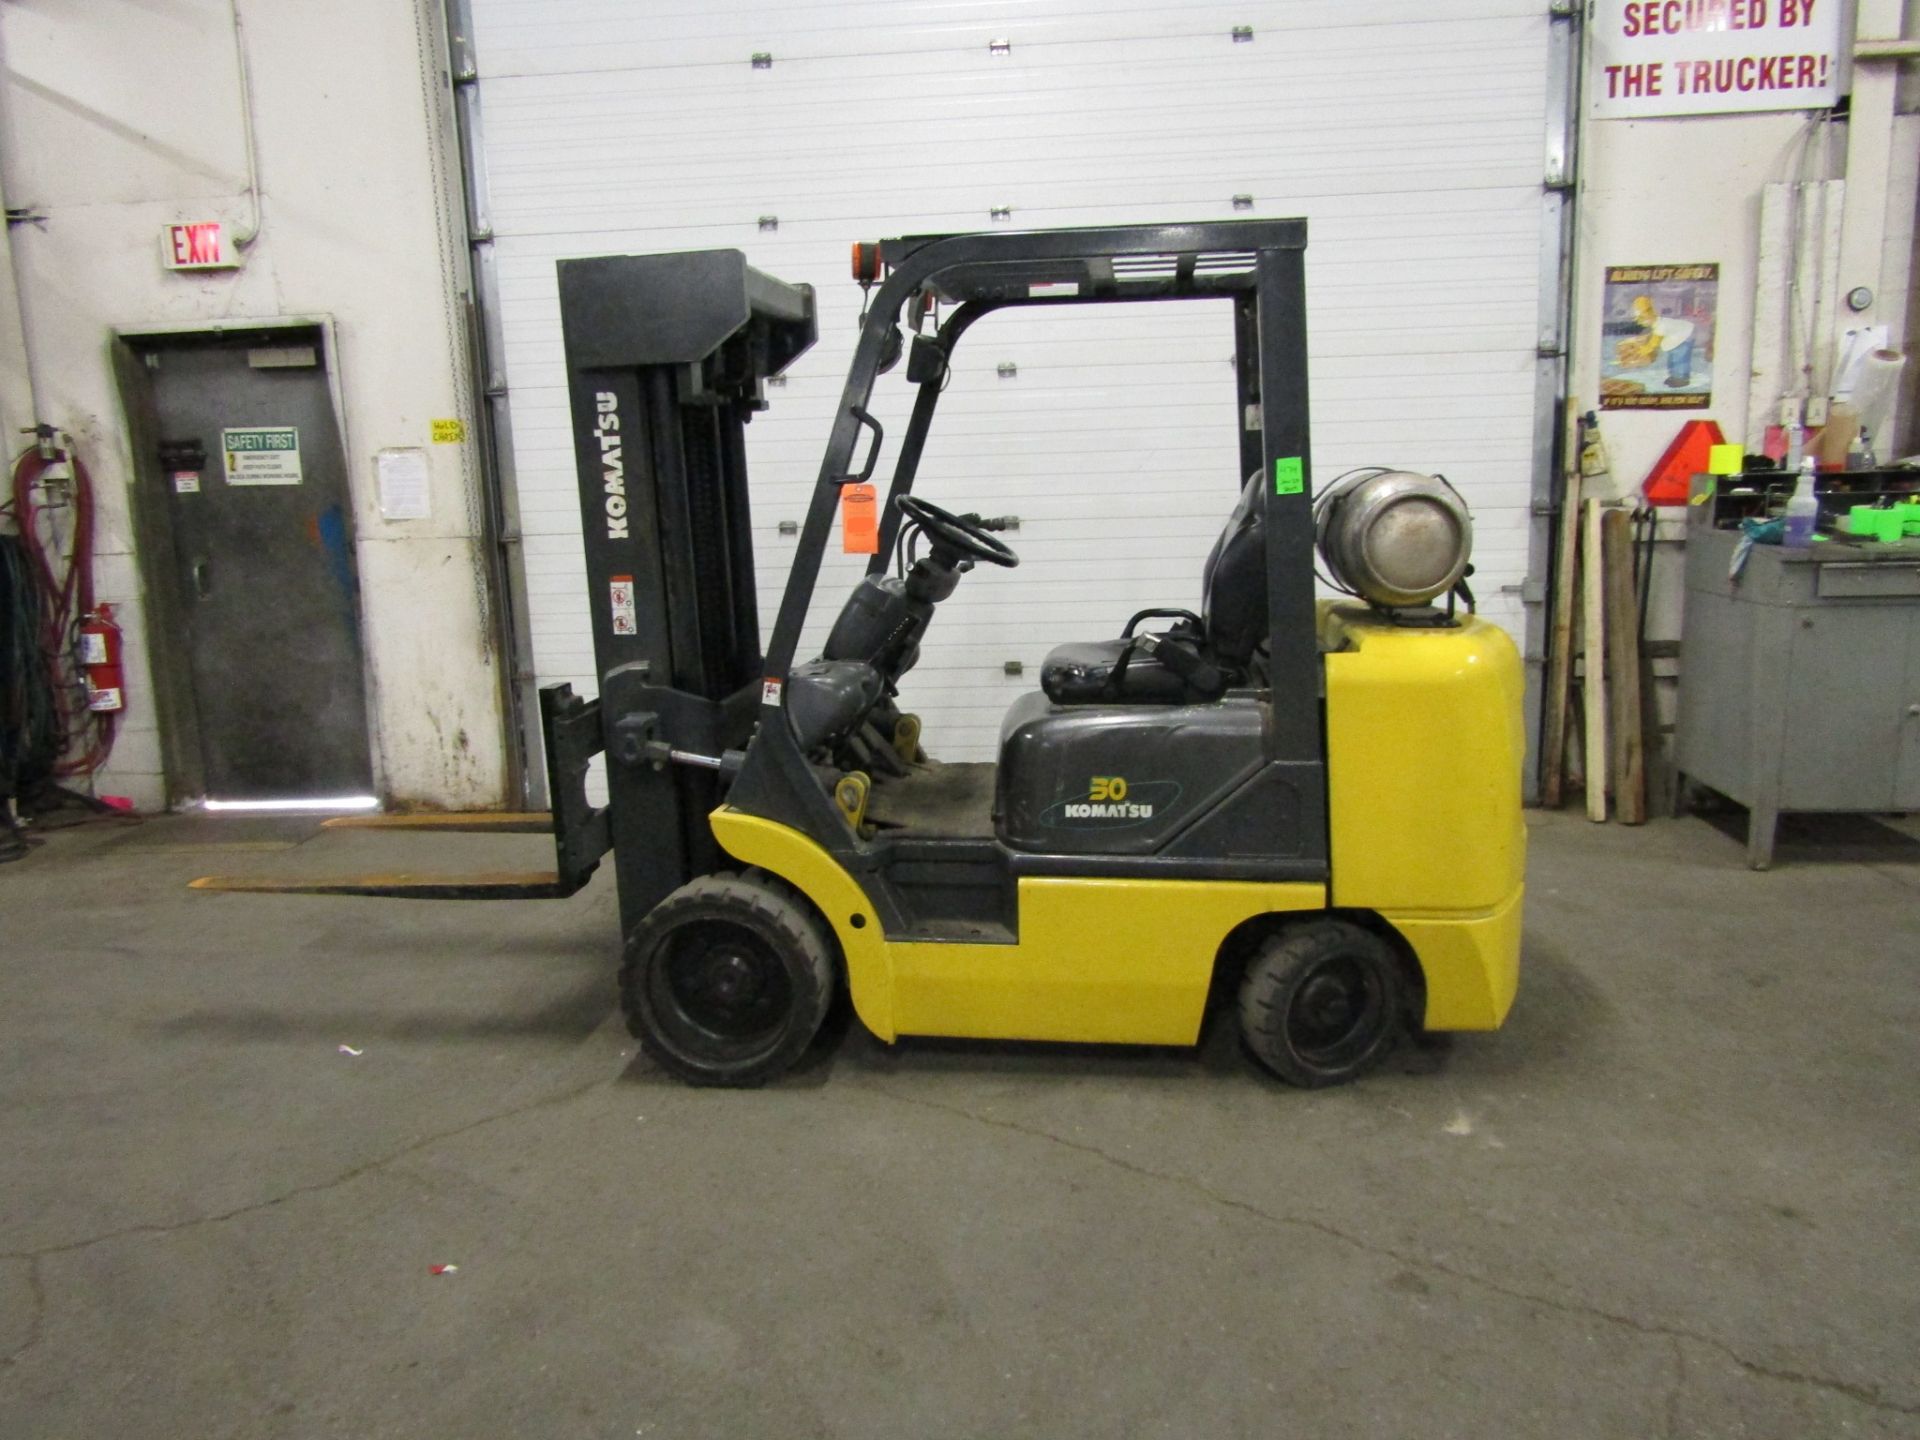 FREE CUSTOMS - Komatsu 5500lbs Capacity Forklift with 4-stage mast - LPG (propane) with LOW HOURS ( - Image 2 of 2